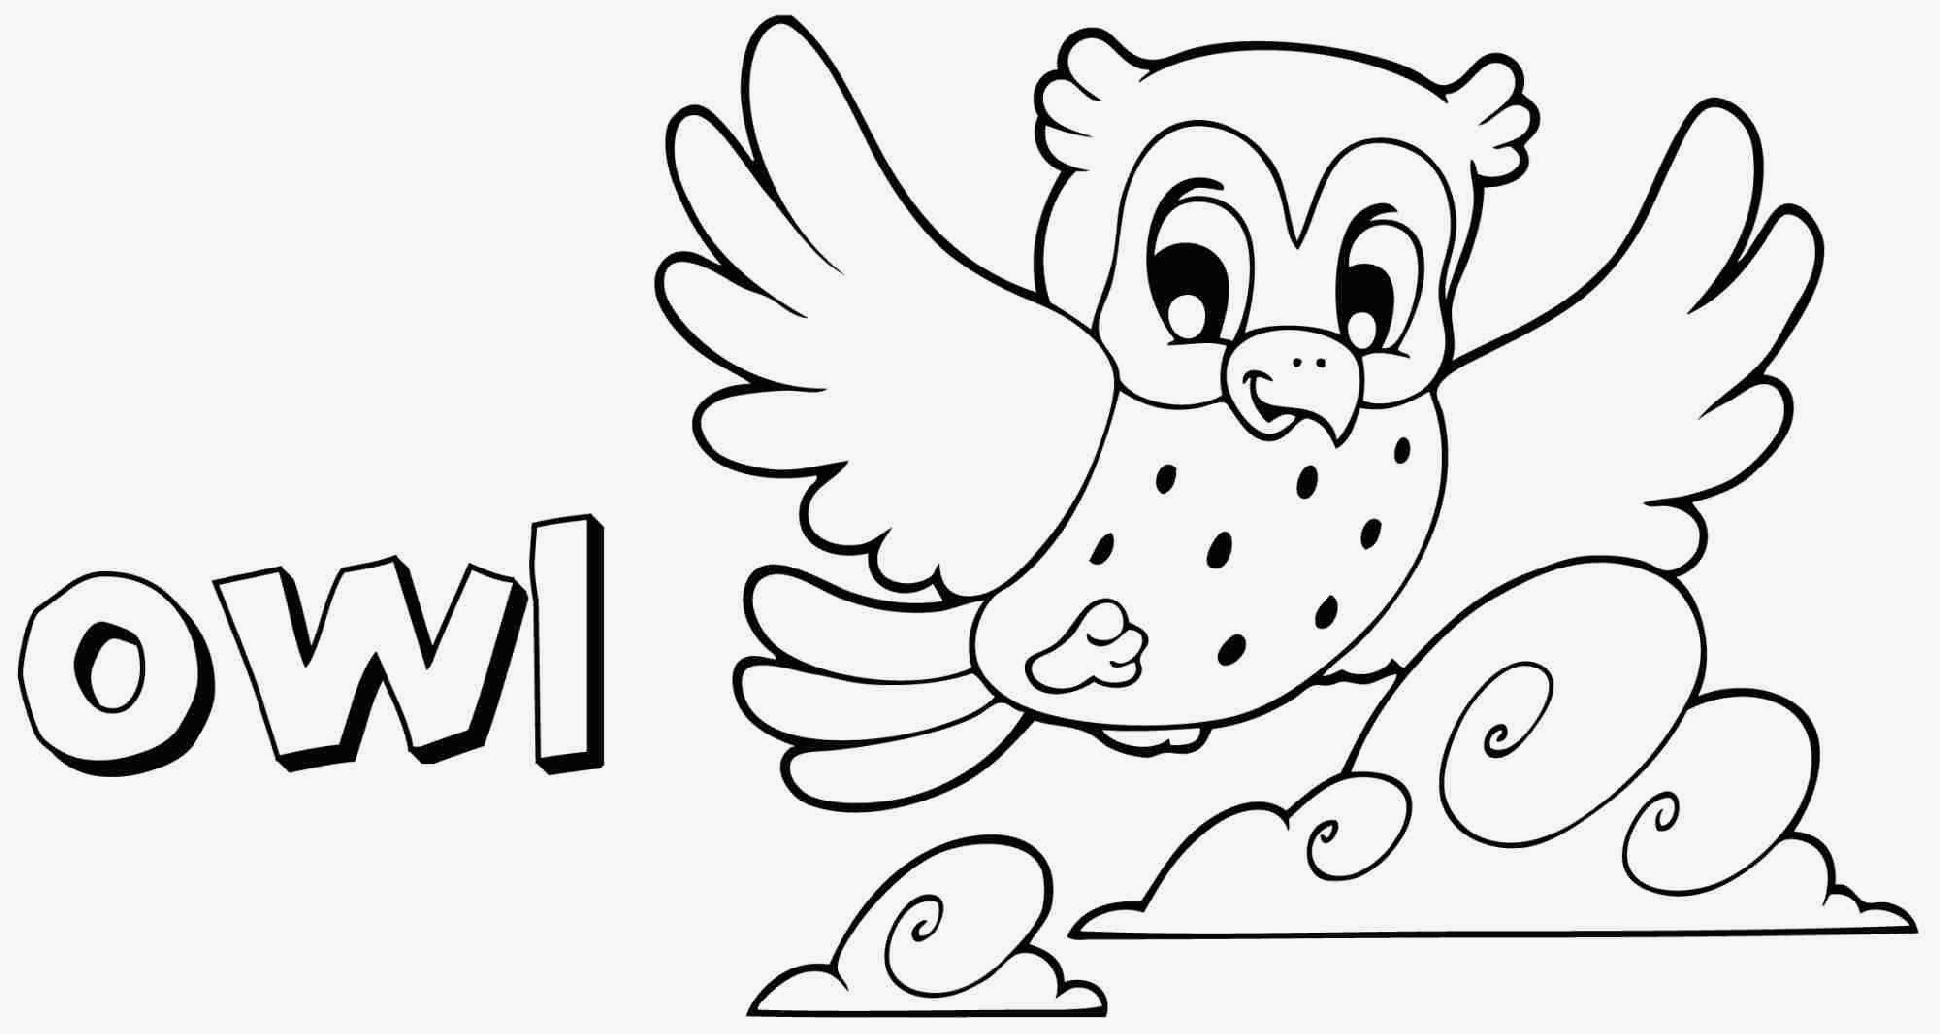 Owl Coloring Pages Owl Free Coloring Pages Ba Owls Coloring ...